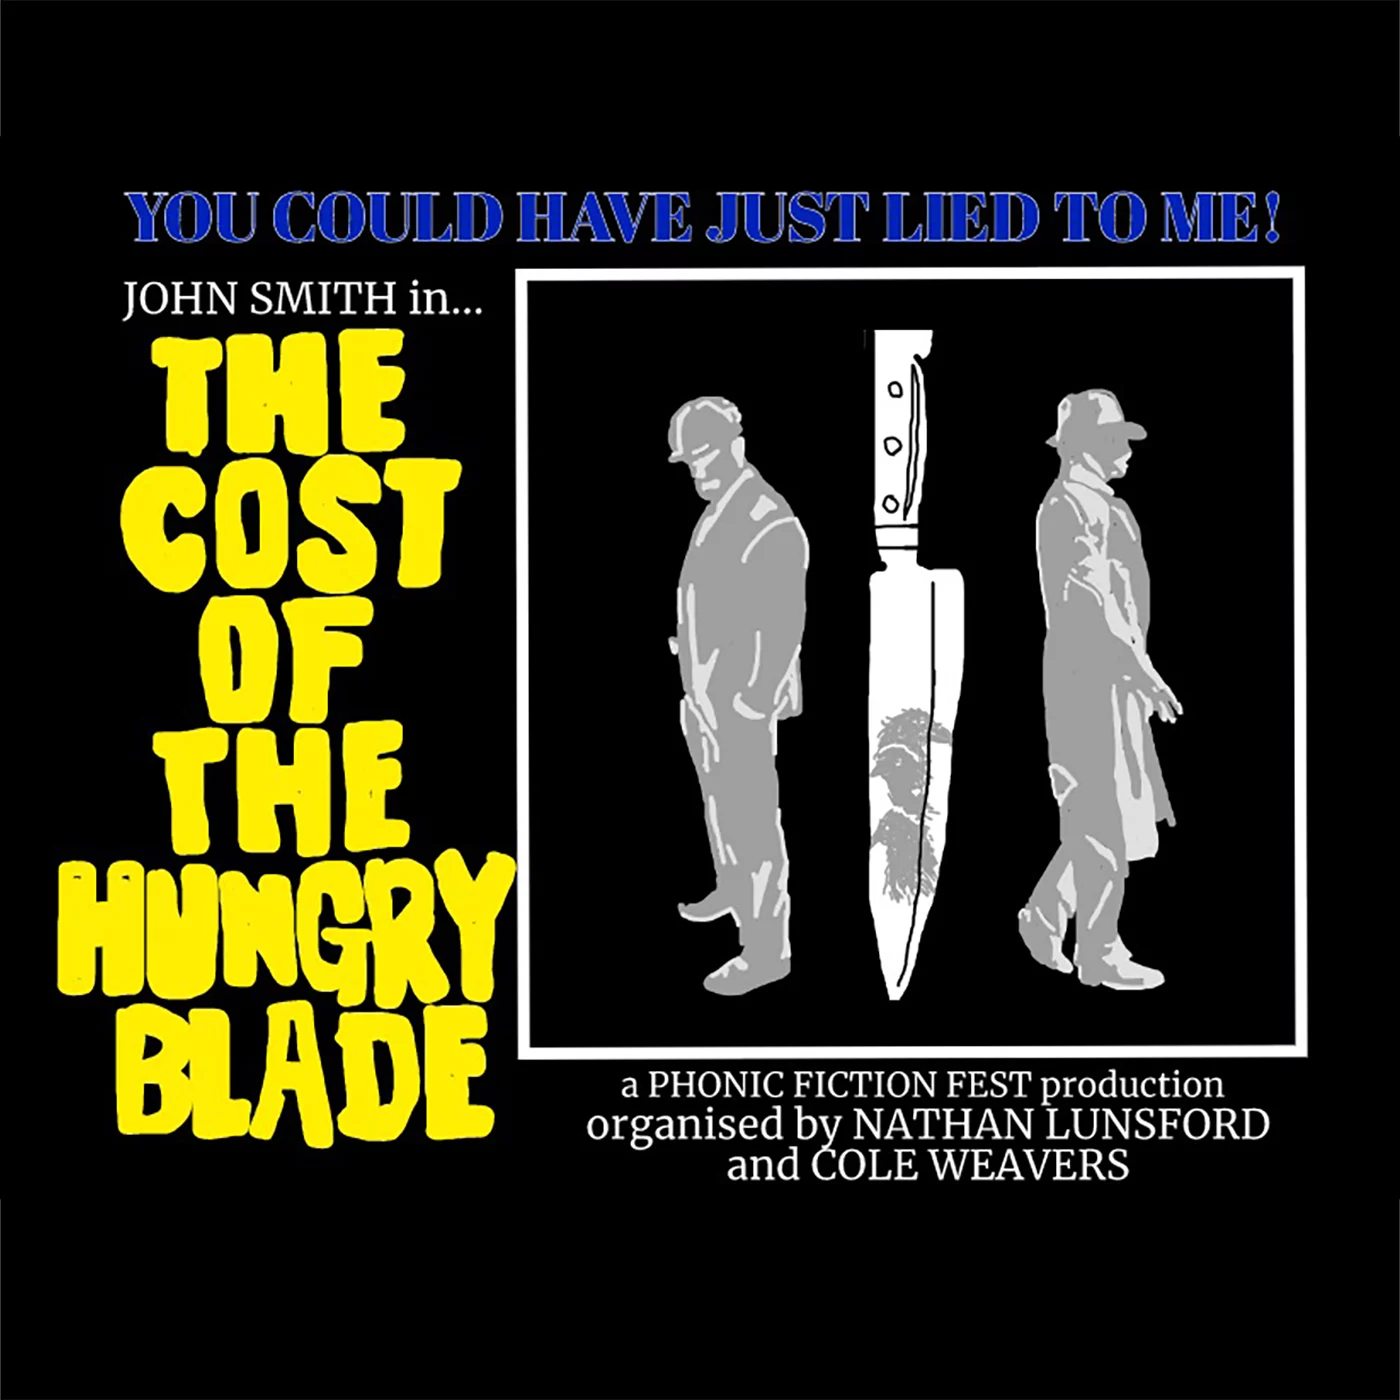 John Smith and the Cost of the Hungry Blade